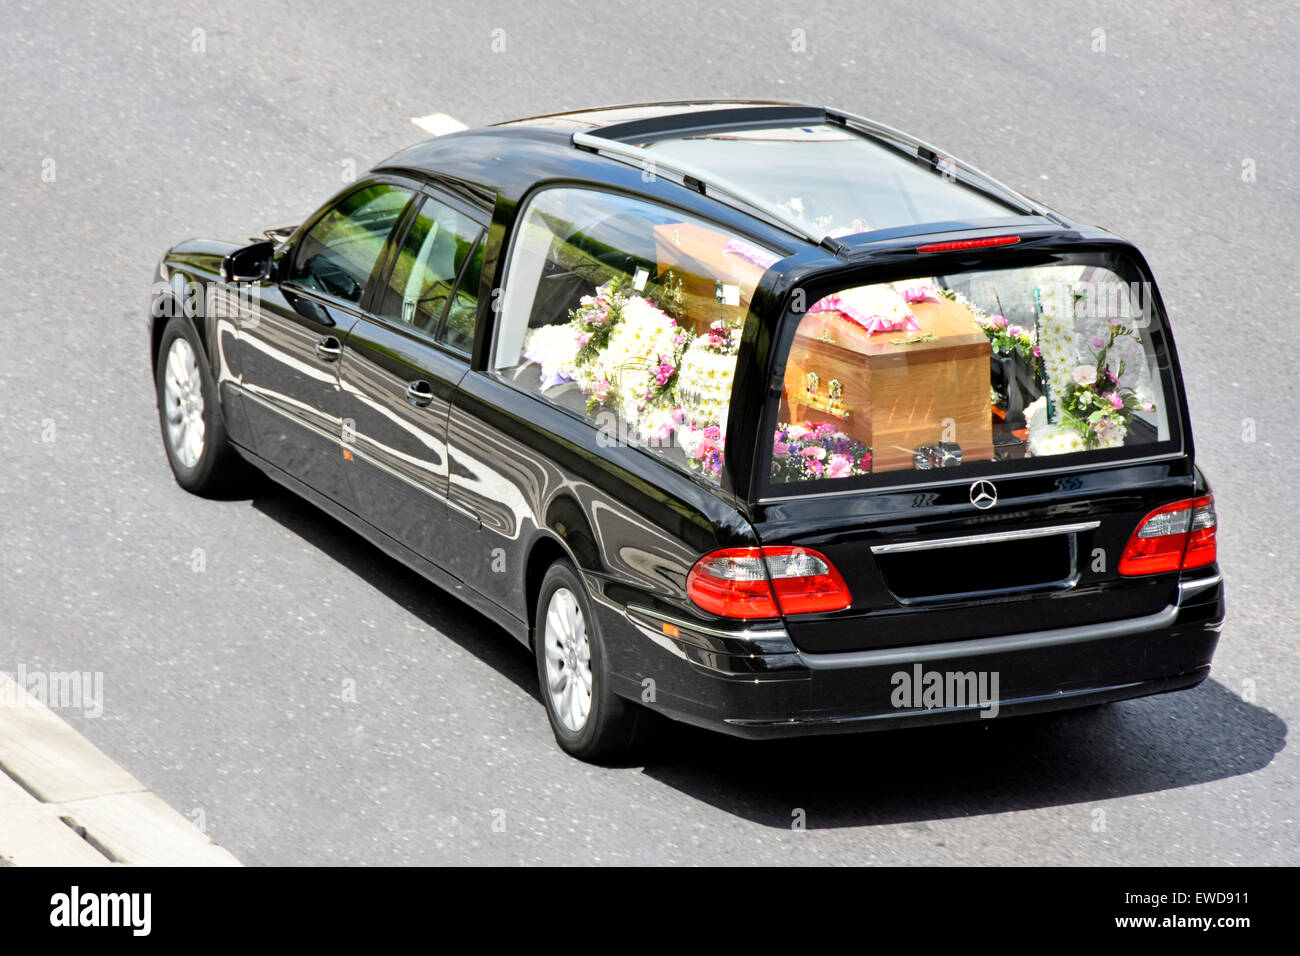 Coffin in funeral hearse floral tributes obscured numberplate with one brass decoration removed view from above looking down from bridge England UK Stock Photo